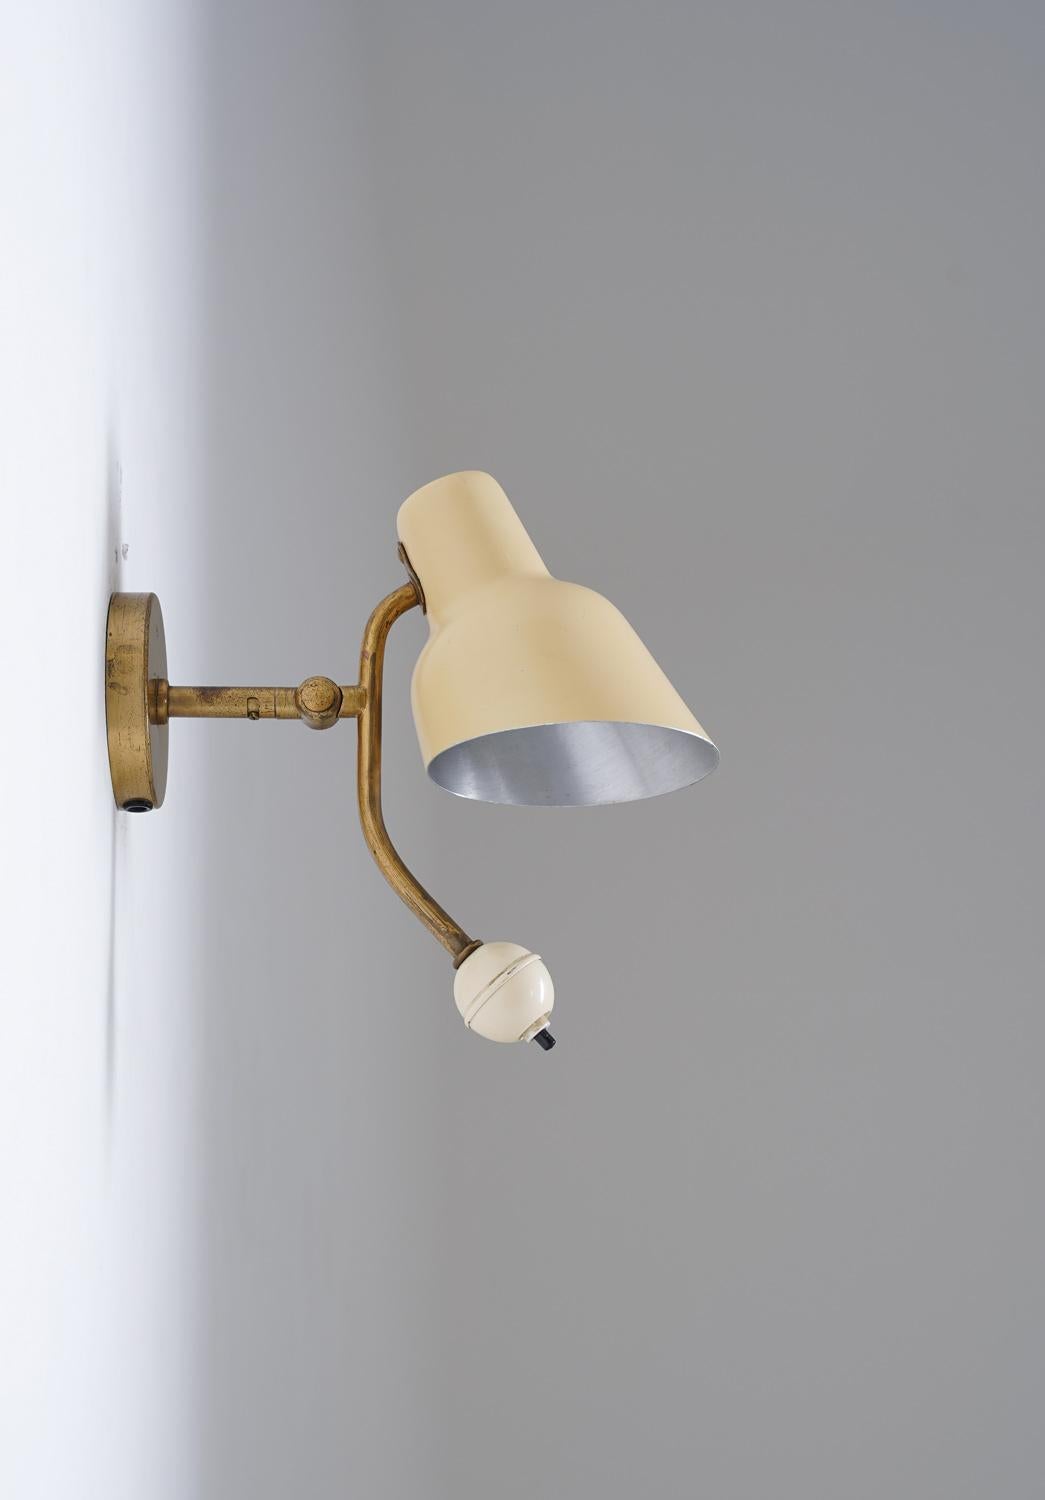 Very rare wall lamp by Bertil Brisborg for Nordiska Kompaniet, 1940s.
This lamp consists of a metal shade, fixtured on an adjustable brass rod. The switch is found at the end of the rod, allowing you to adjust the shade and turn on the light at the